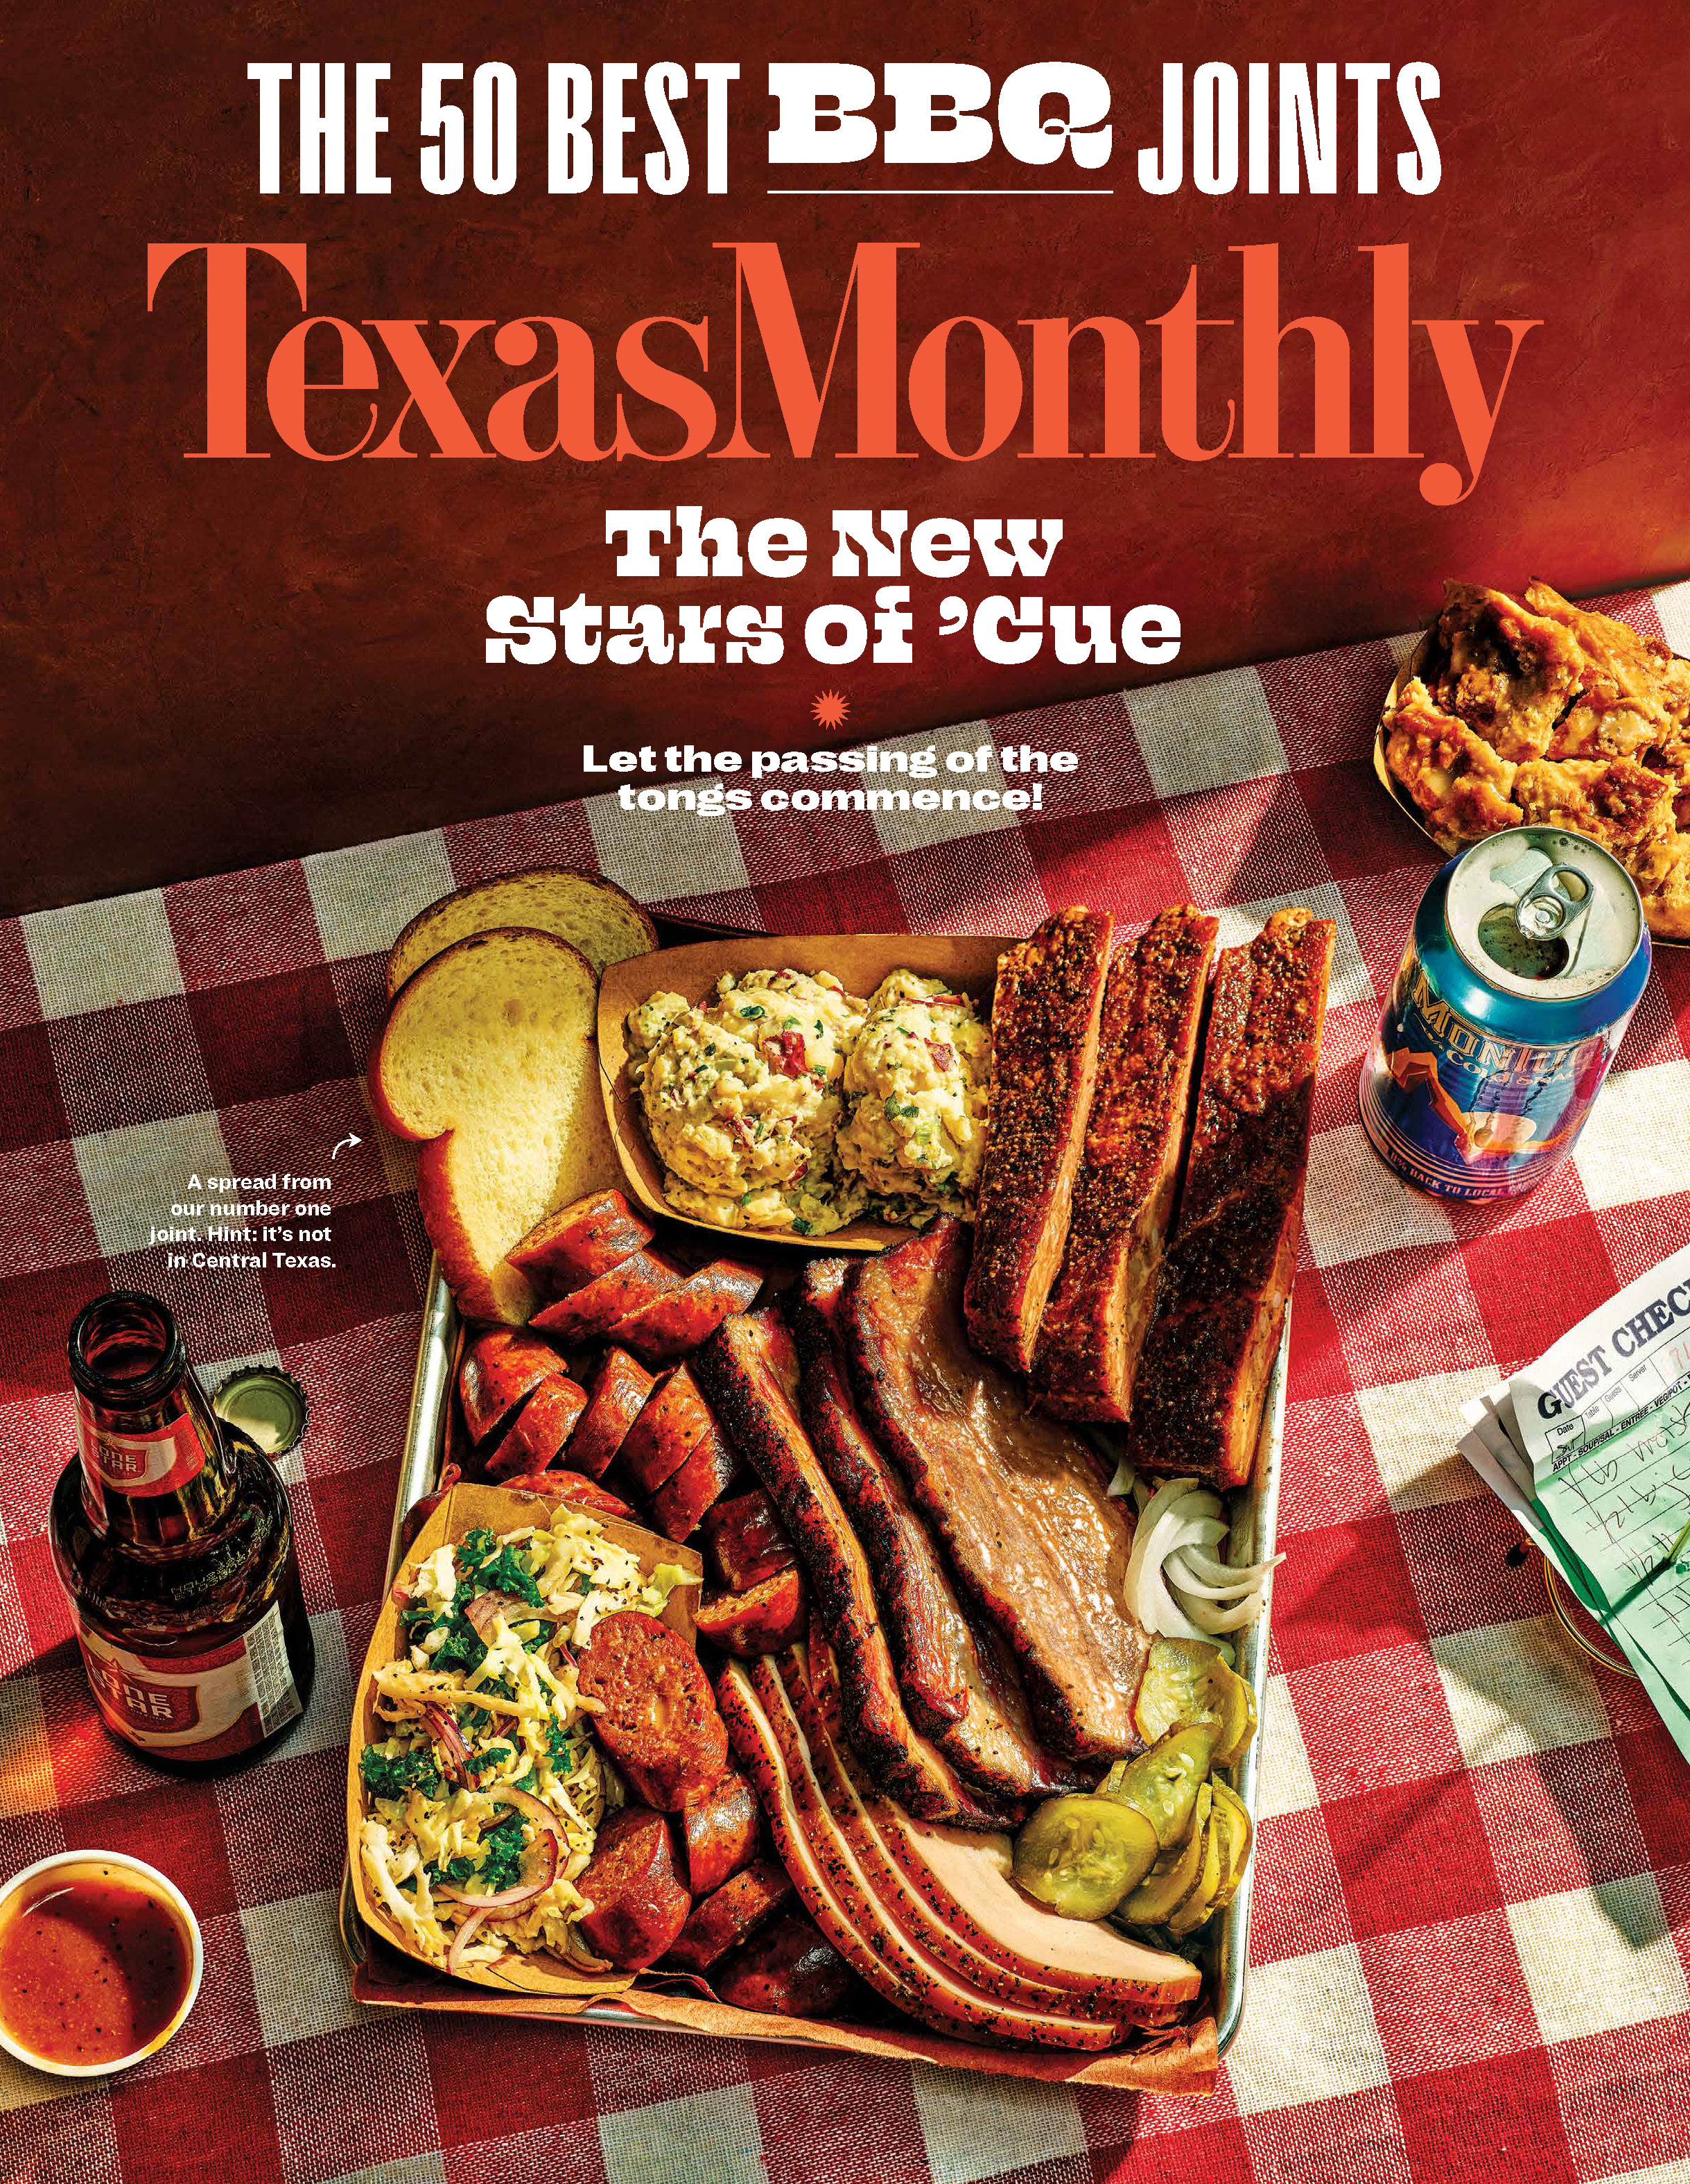 Texas Monthly - "The 50 Best BBQ Joints," November 2021